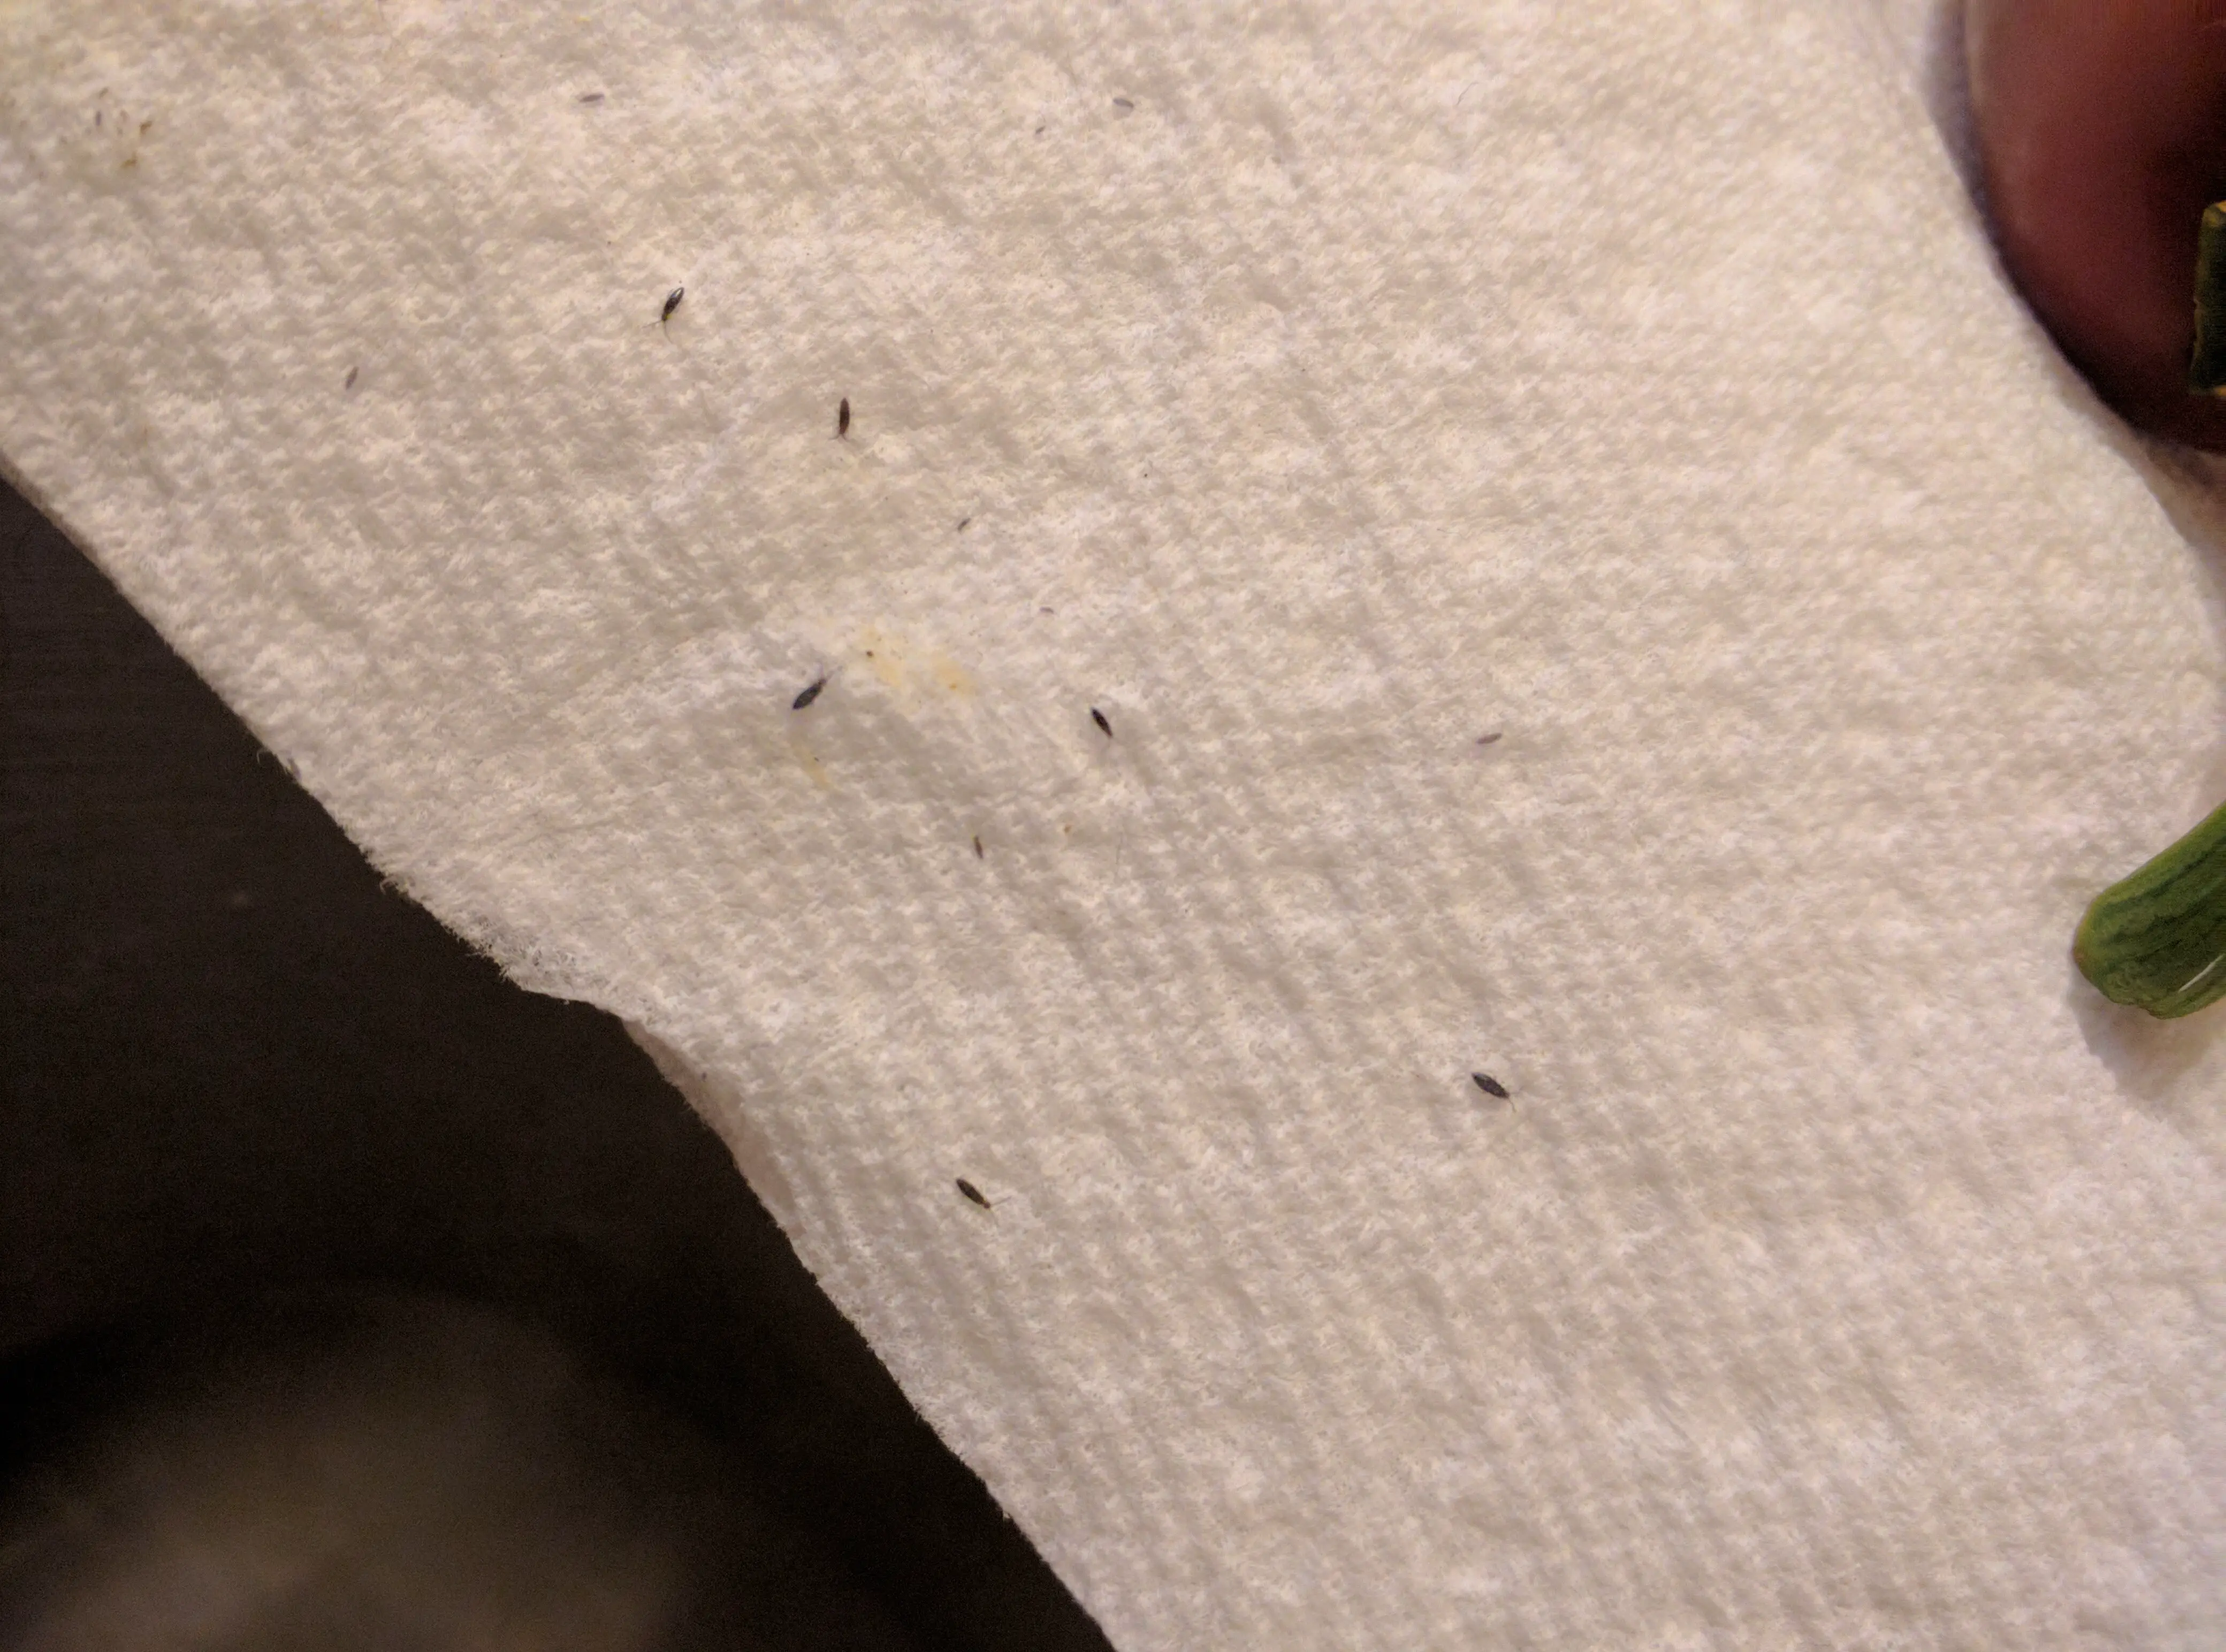 Tiny Black Bugs In Kitchen Pest Guide, Little Black Bugs In My Kitchen Cupboards